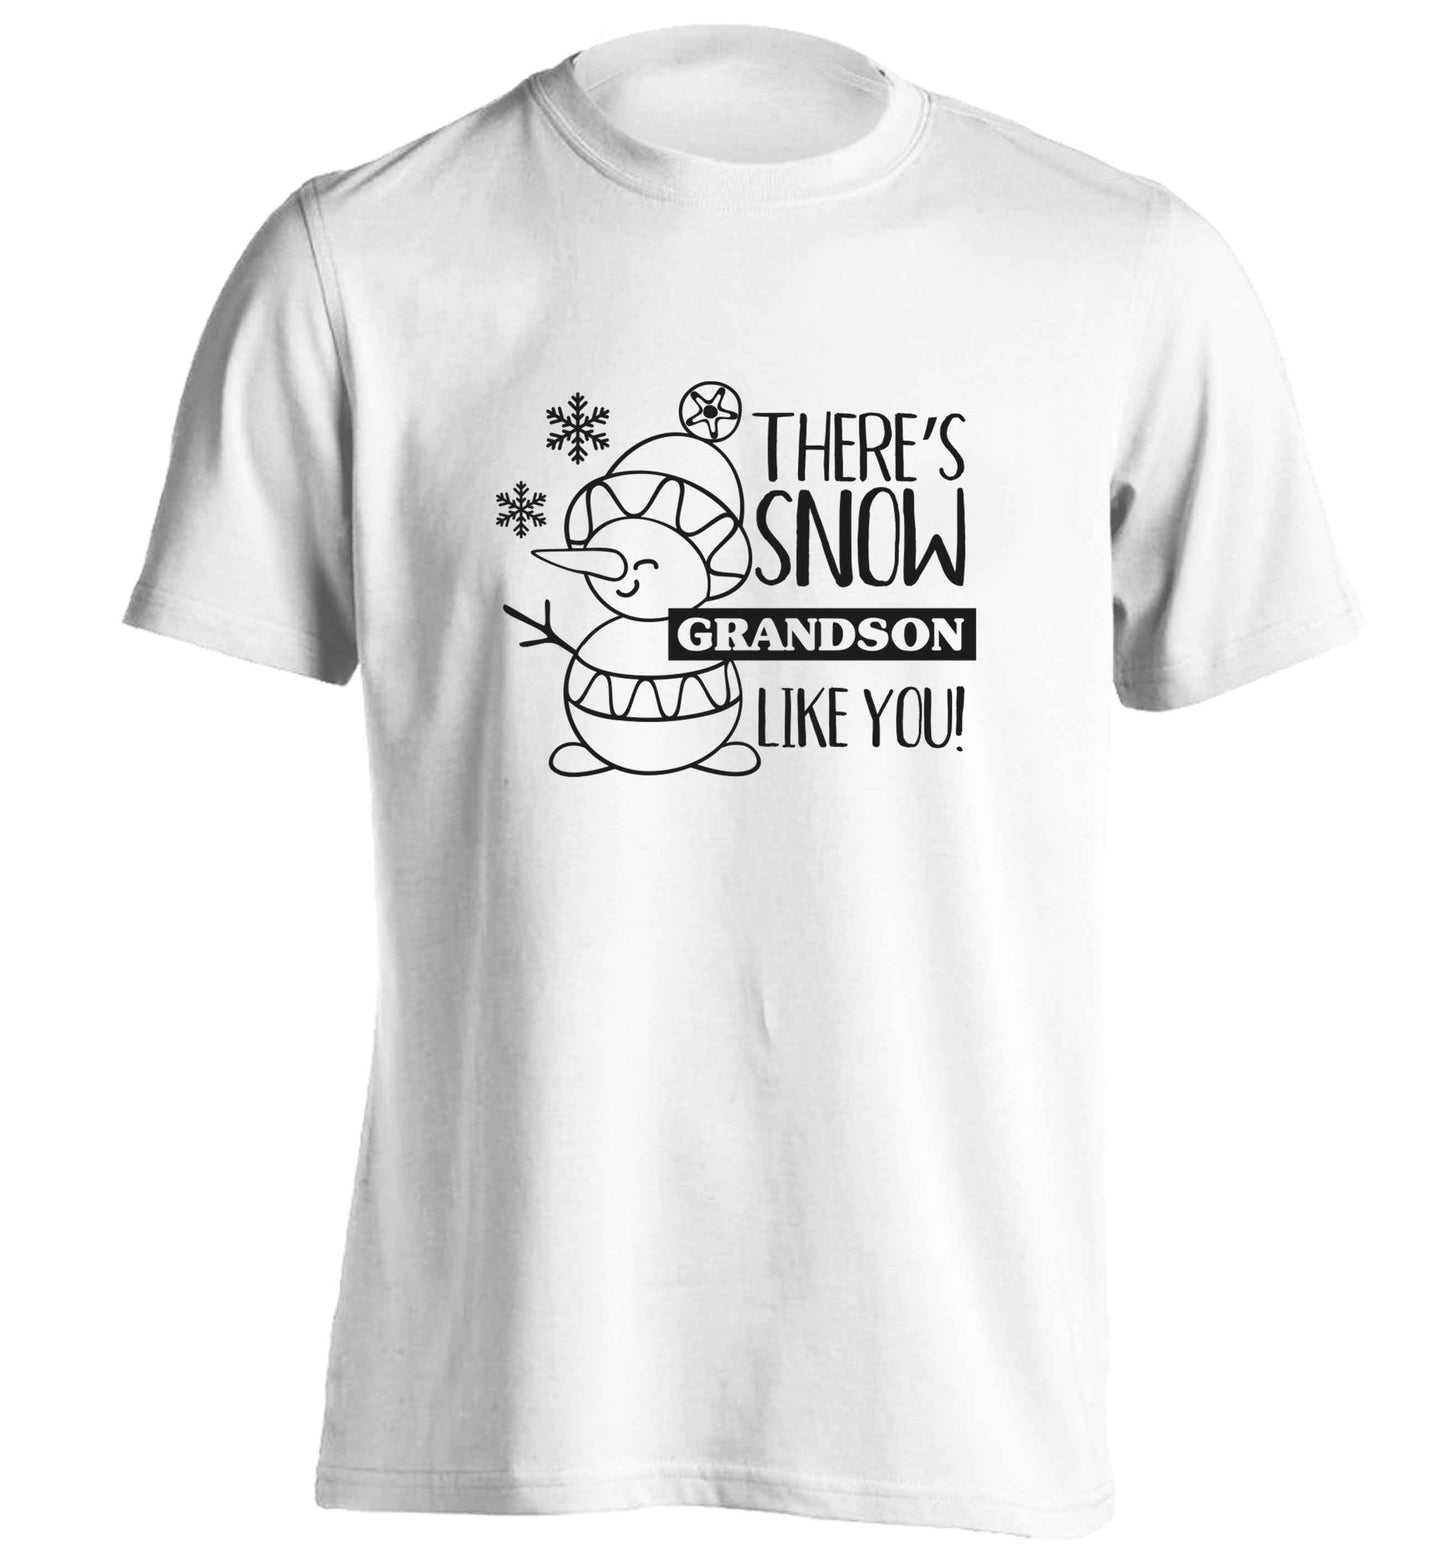 There's snow grandson like you adults unisex white Tshirt 2XL